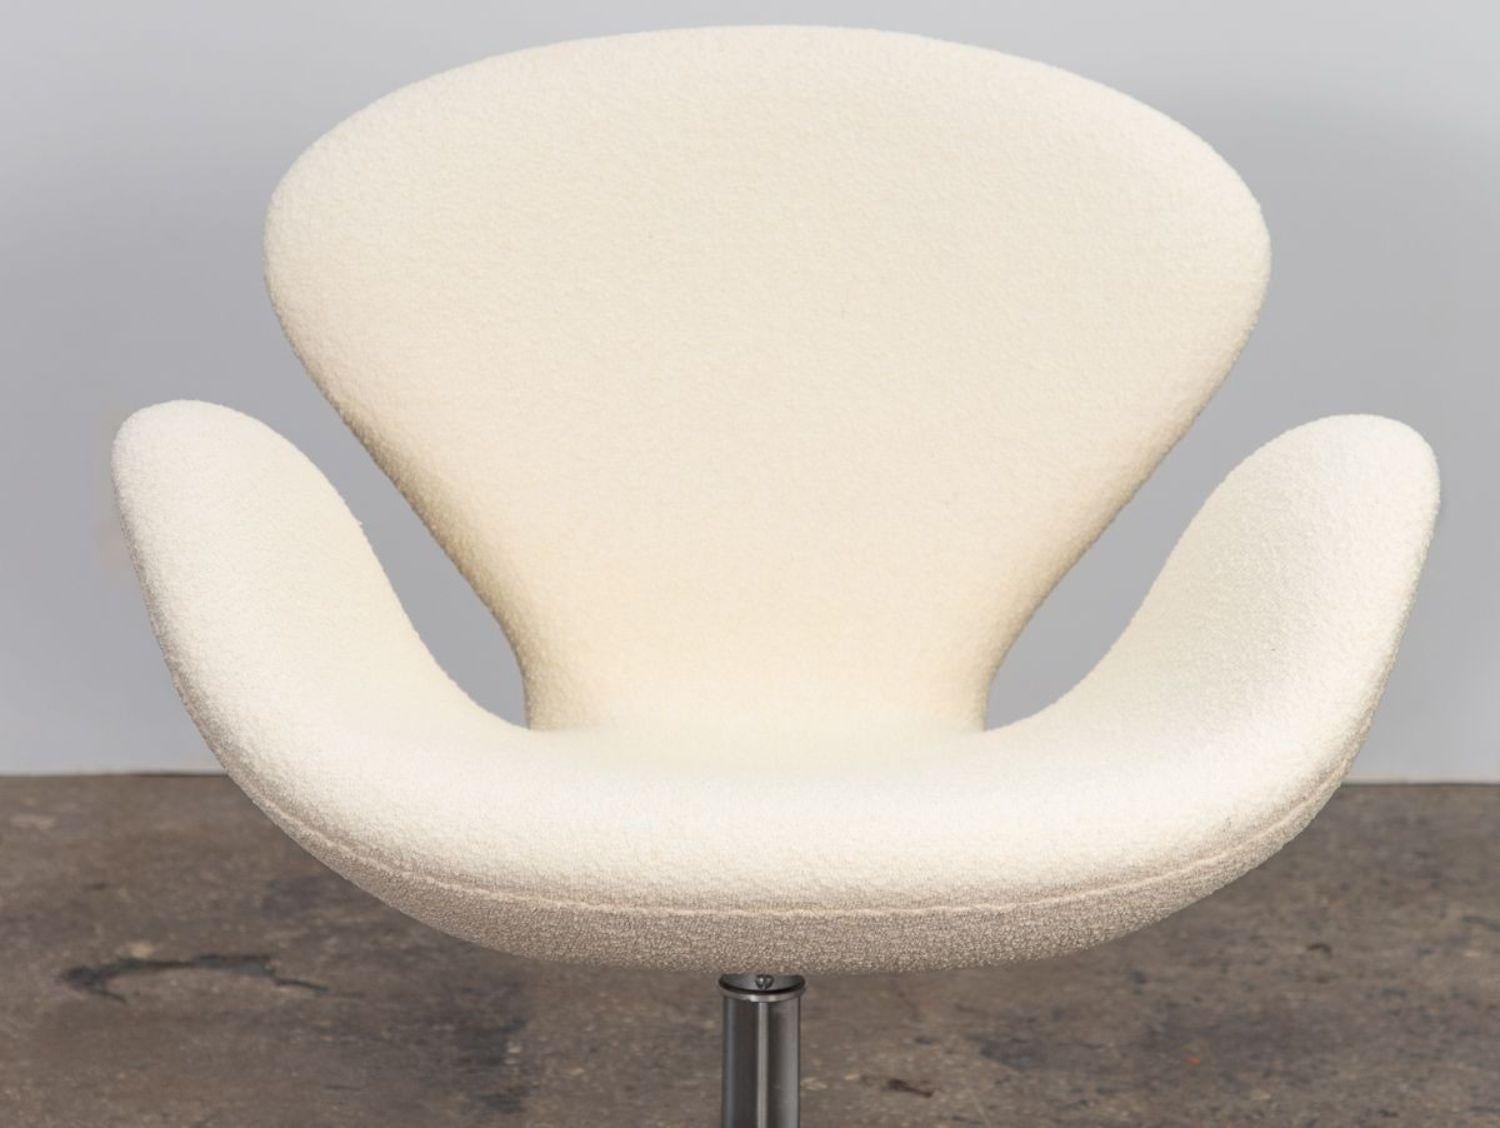 Iconic Swan chair designed by Arne Jacobsen for Fritz Hansen. Attractive, ergonomic curves designed to sheathe its sitter and follow resting limbs. Sits on brushed aluminum swiveling four-star base for additional height. Newly upholstered in soft